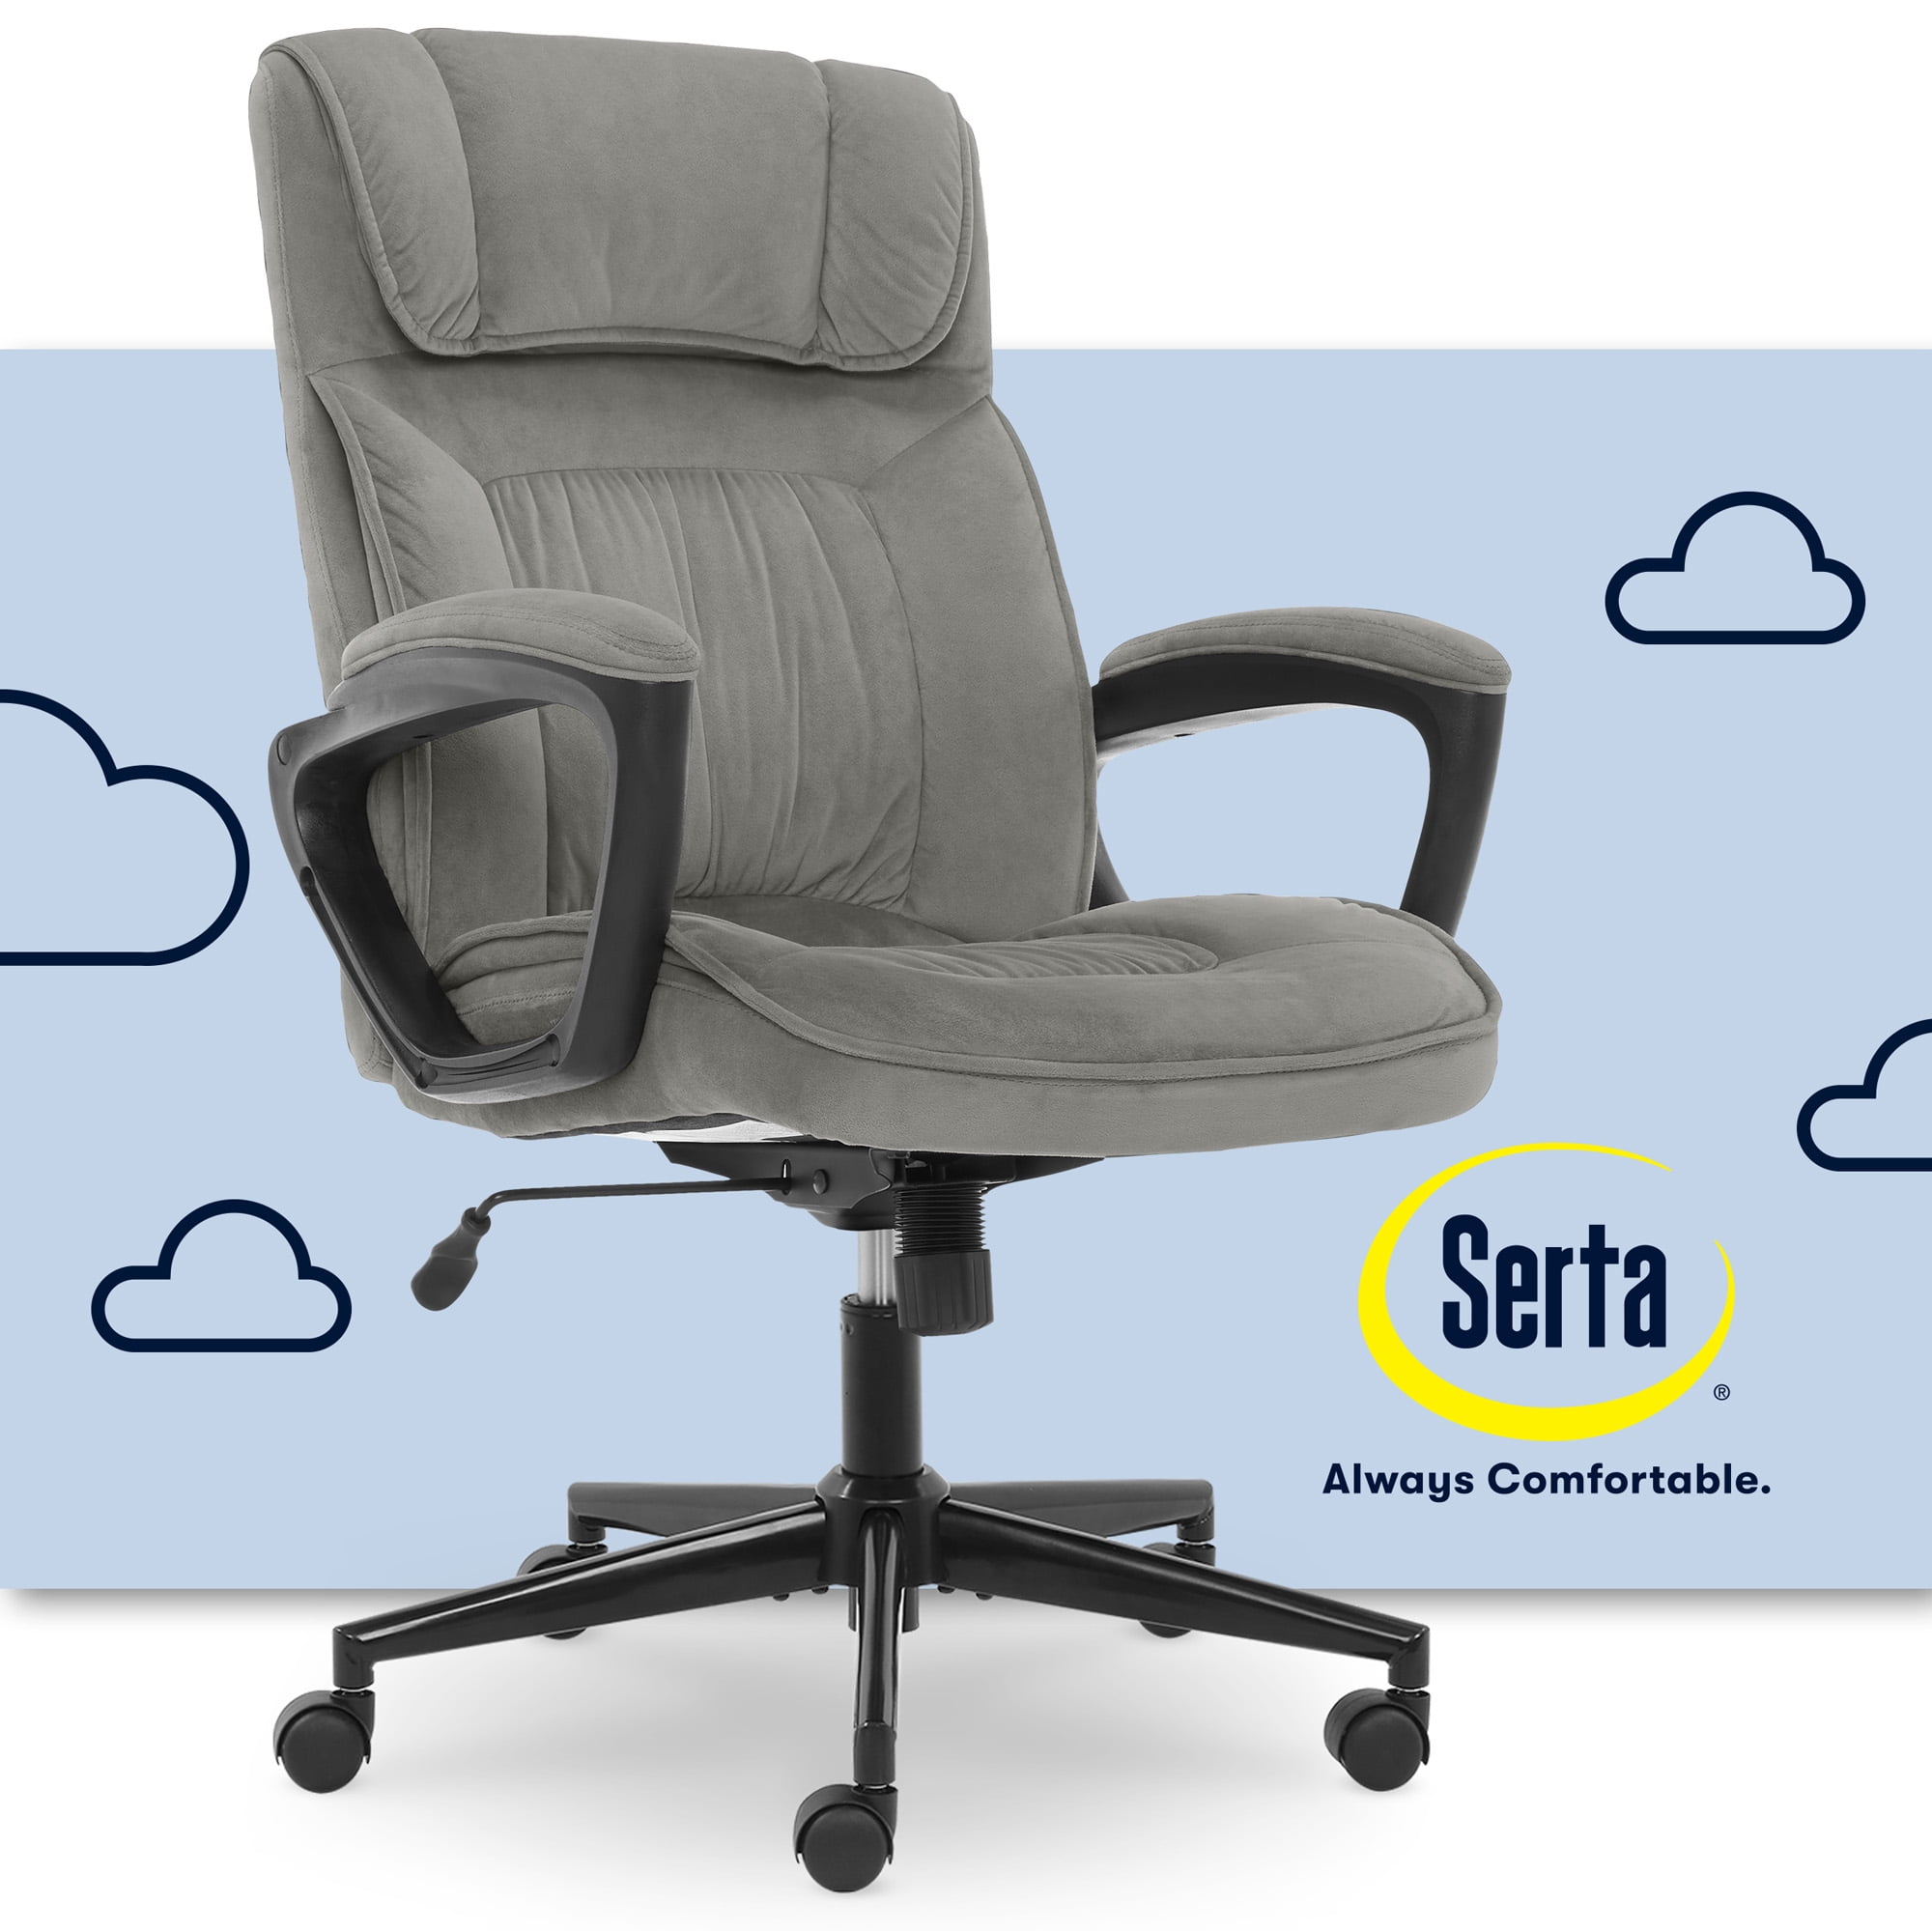 Serta Gray Mesh Fabric Big and Tall Manager Chair Computer Office Desk High Back 